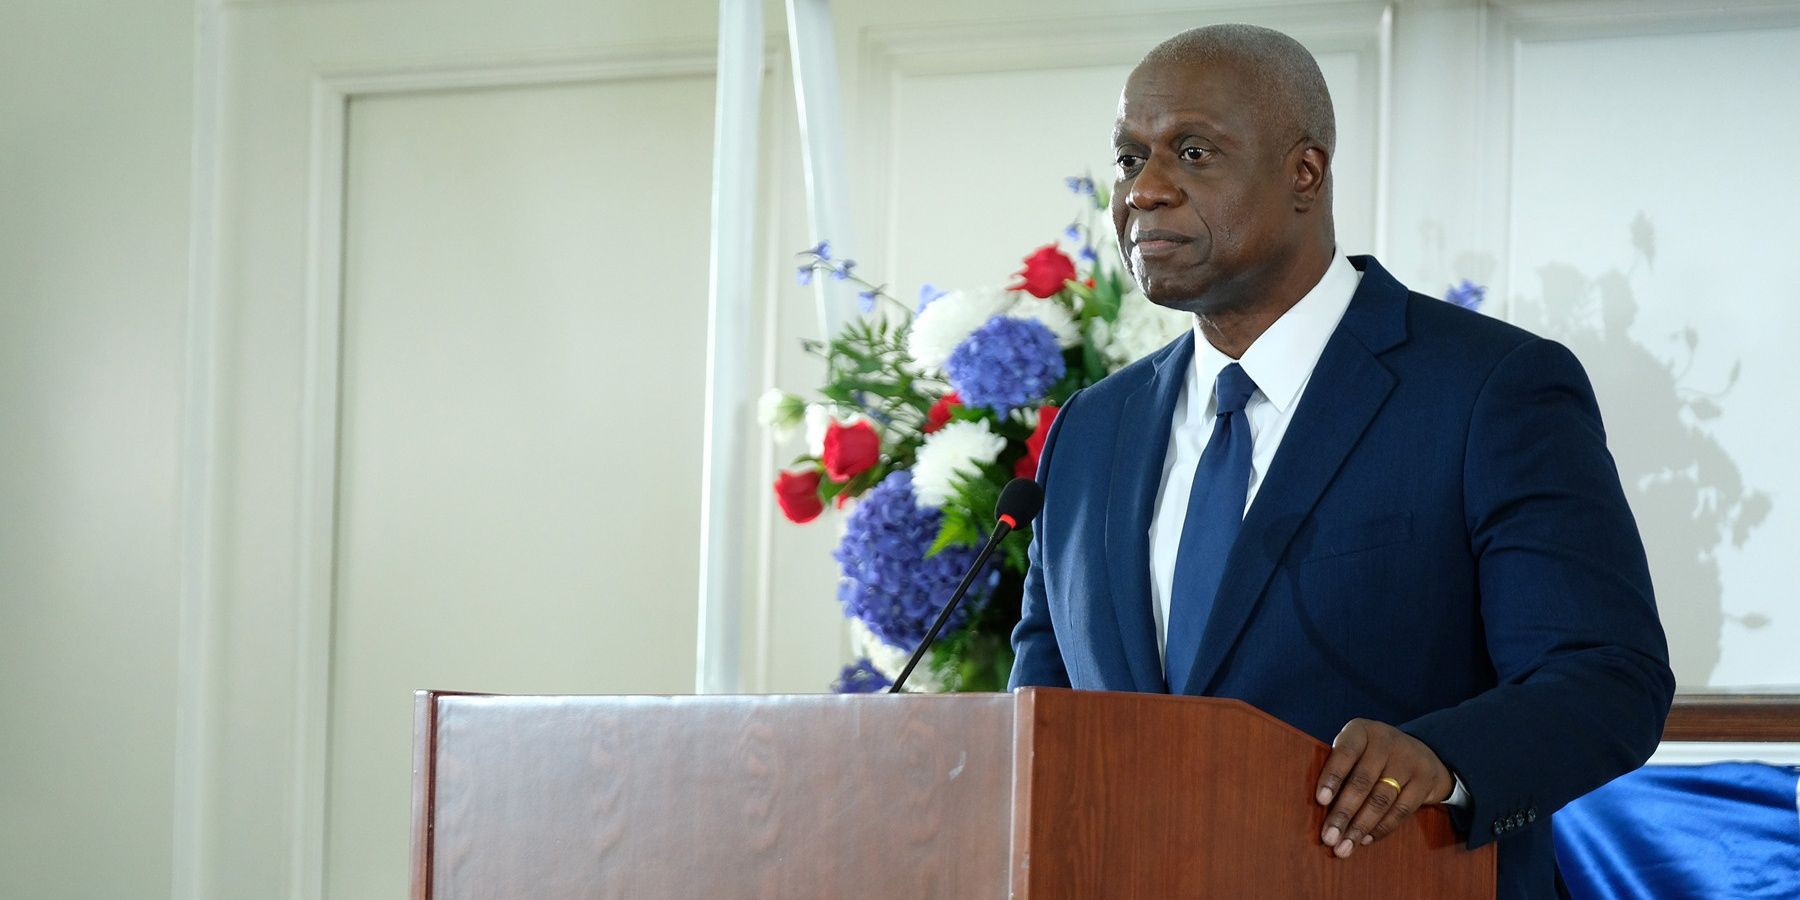 Brooklyn 99 Captain Holt at the pulpit